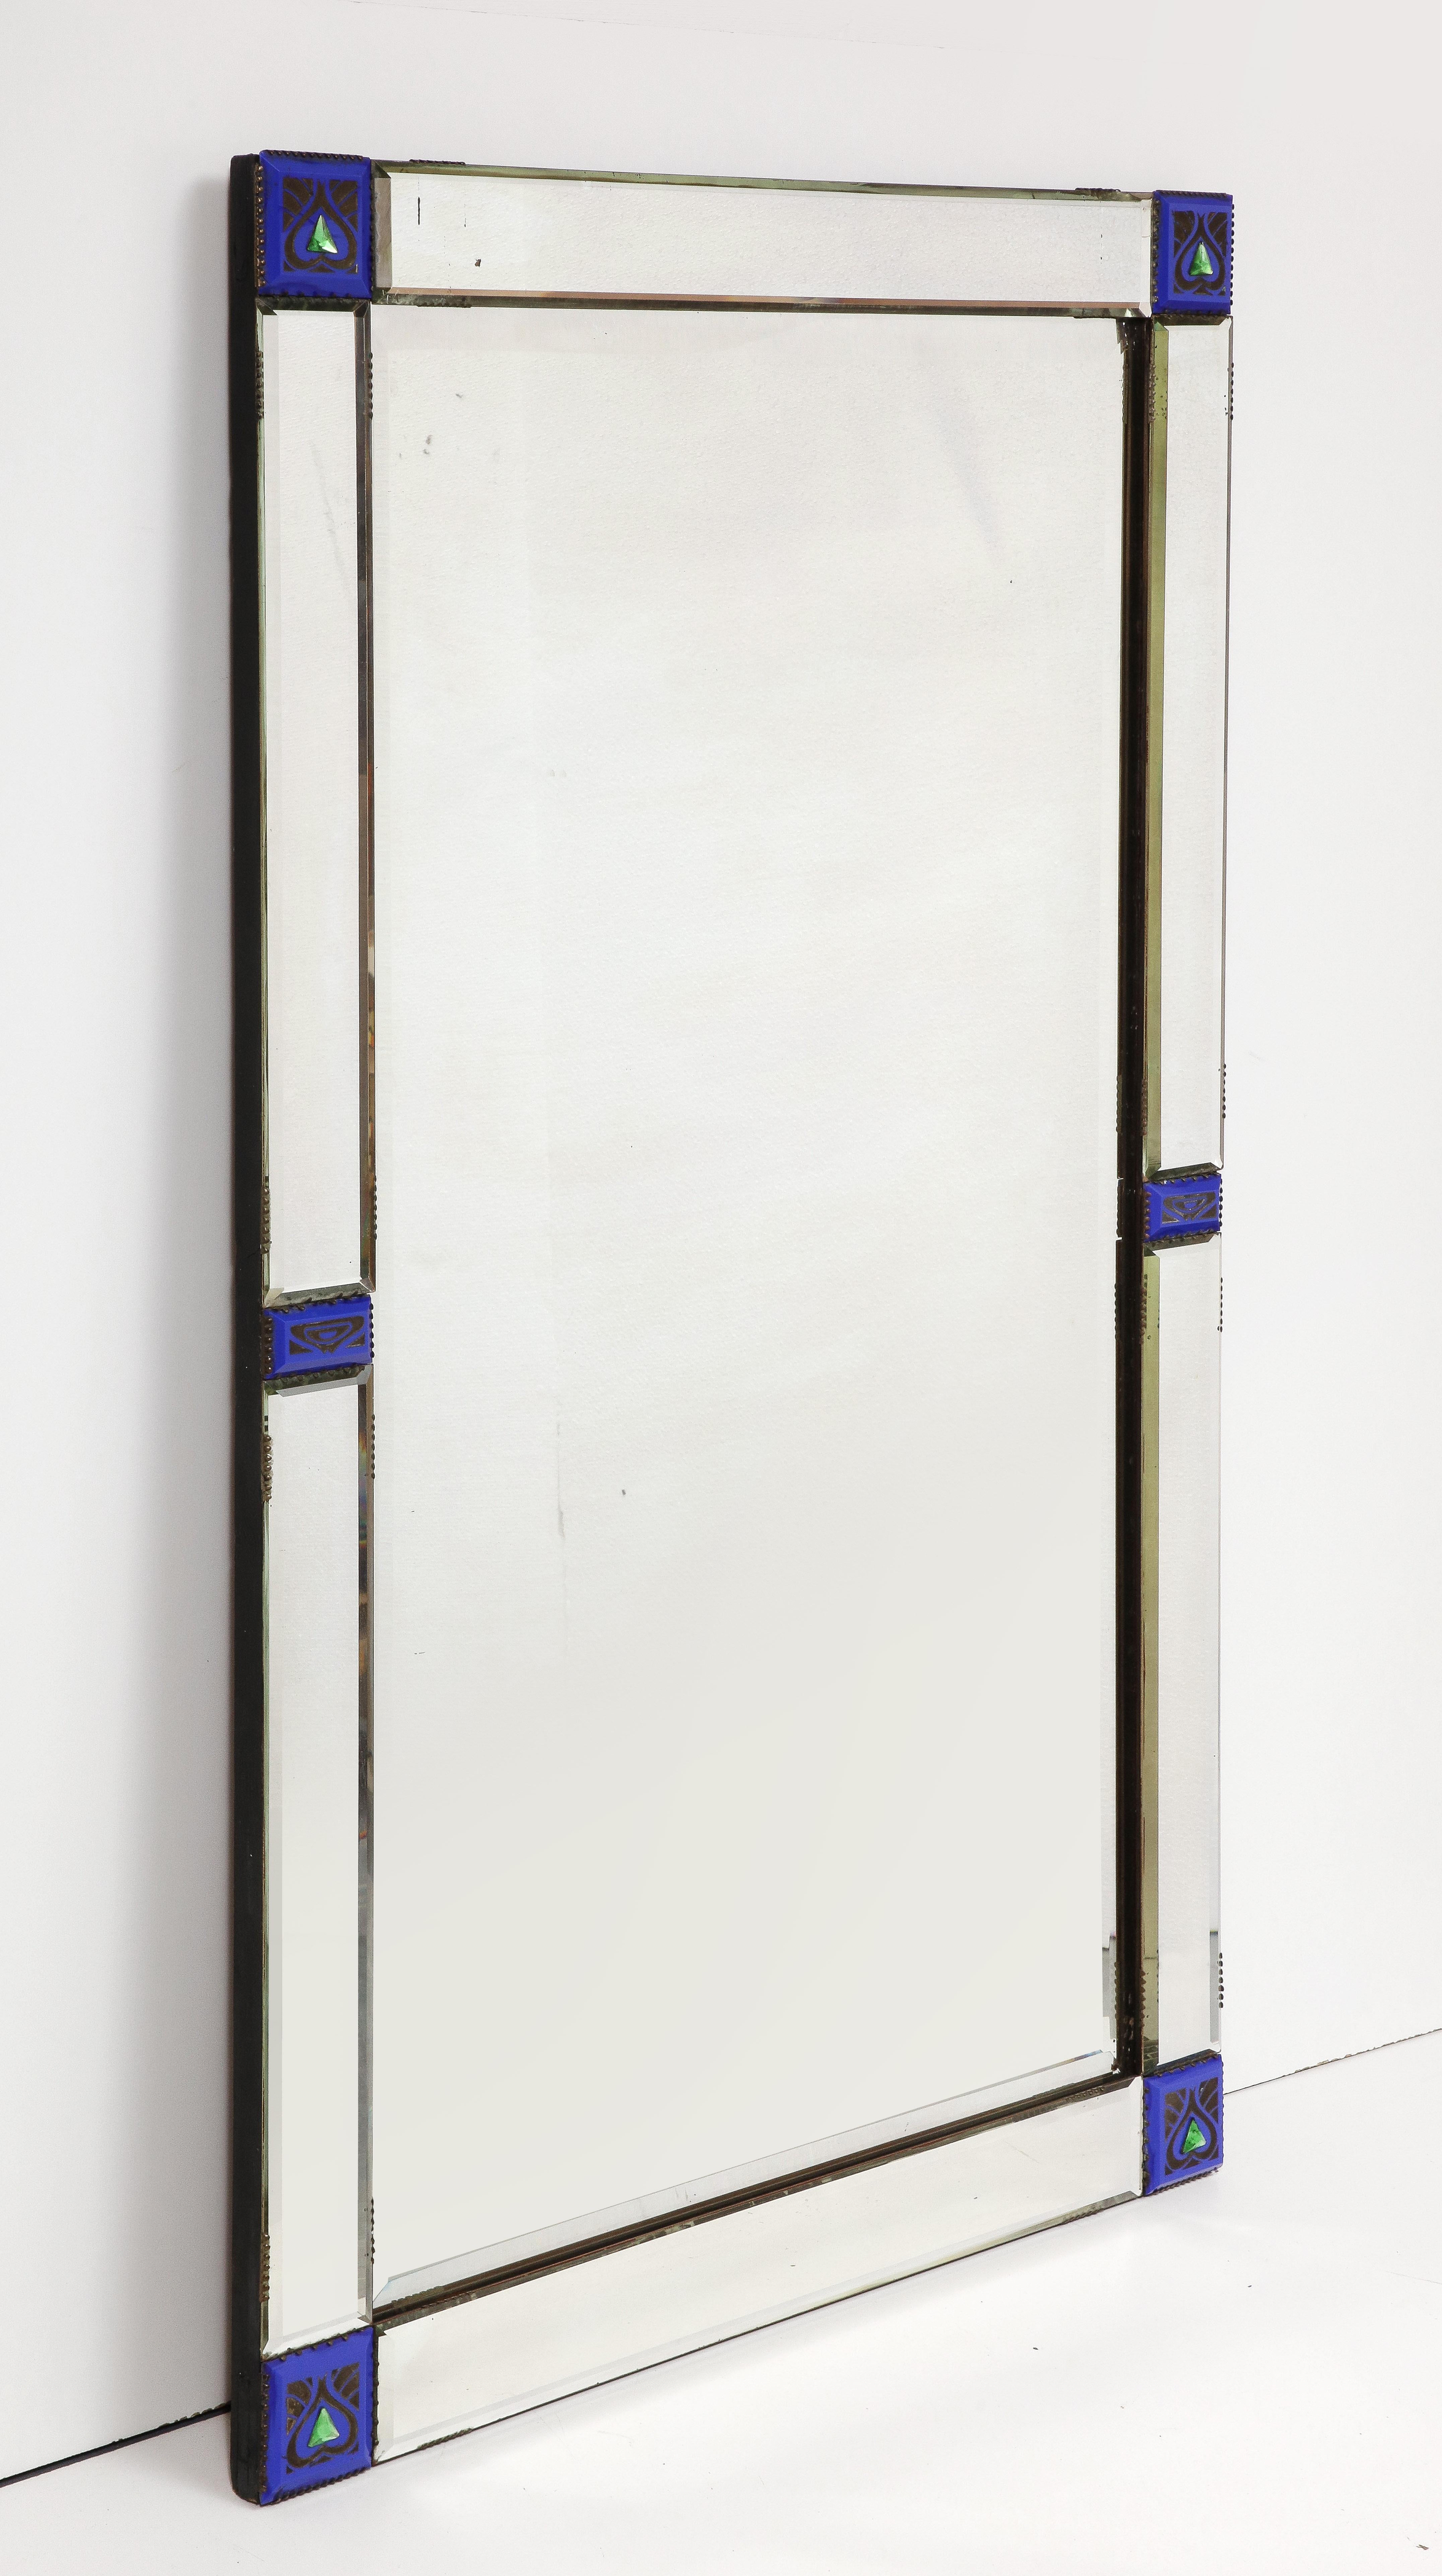 Rare Art Nouveau mirror, Italy, c. 1920. 

This special mirror consists of a beveled border with lozenge cut corners that are engraved with blue square sections, each emblazoned with an emerald green arrow.